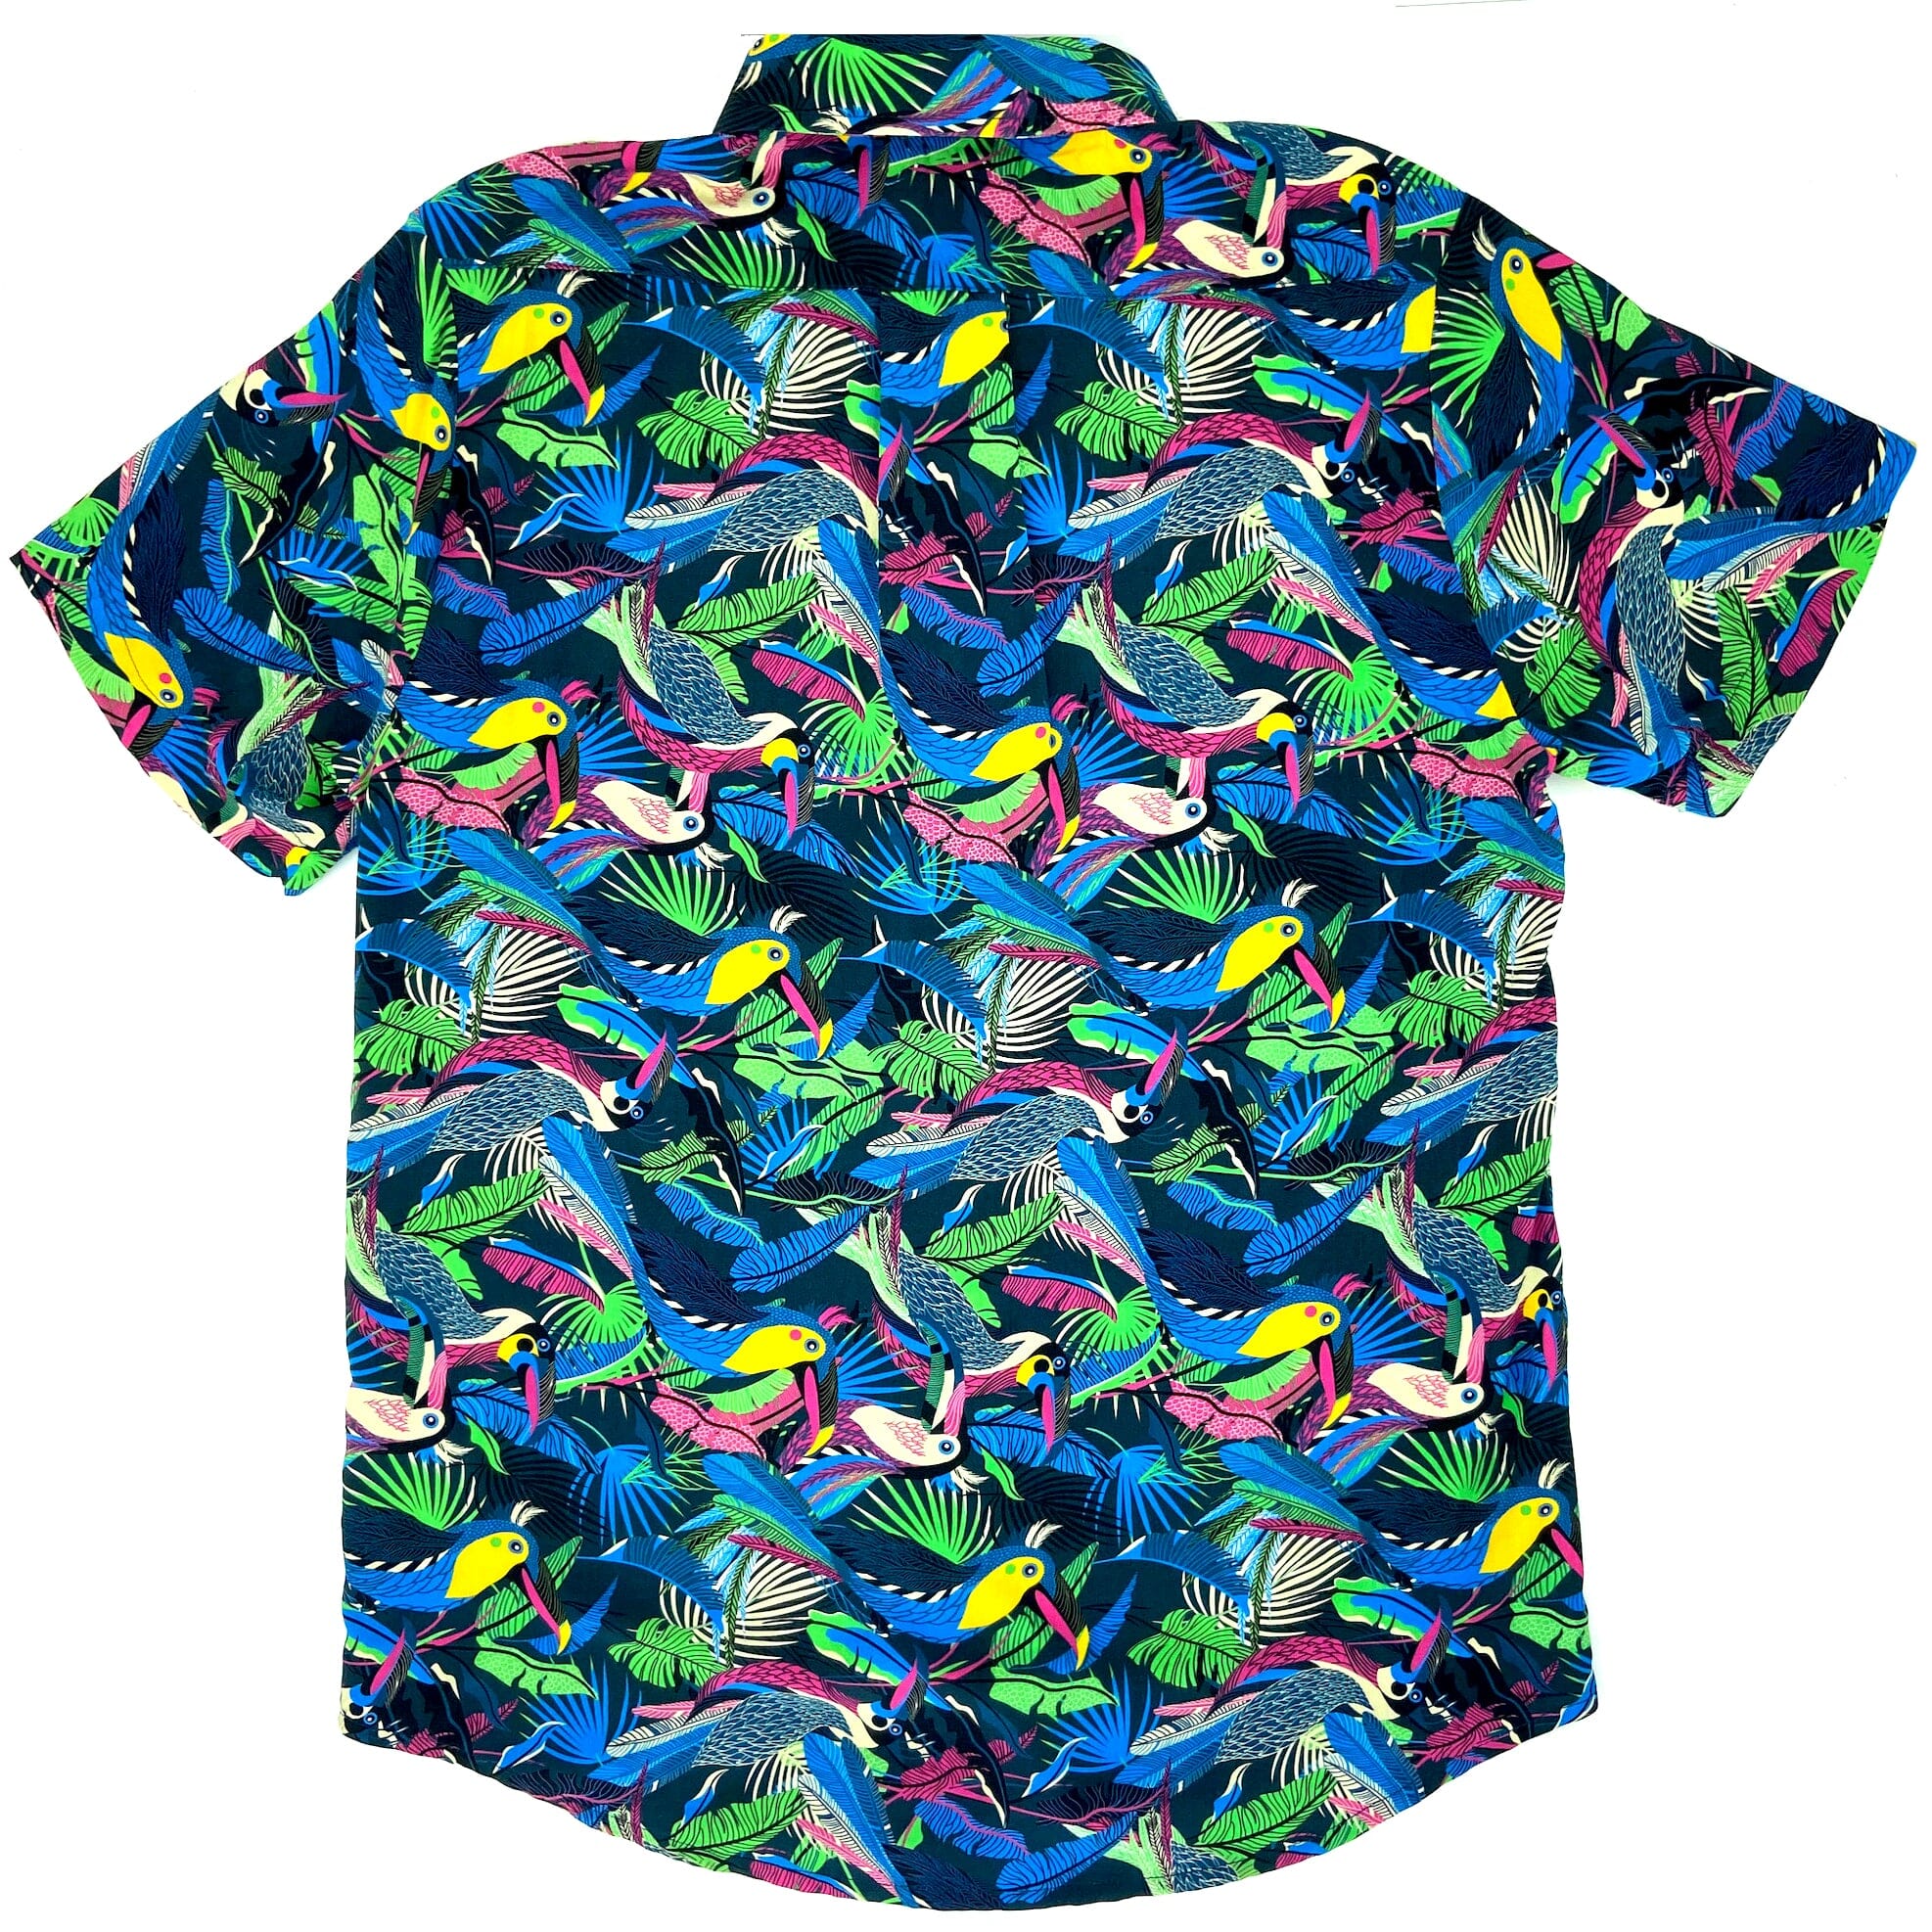 Men's Colorful Tropical Toco Toucan Birds Patterned Button Down Shirt